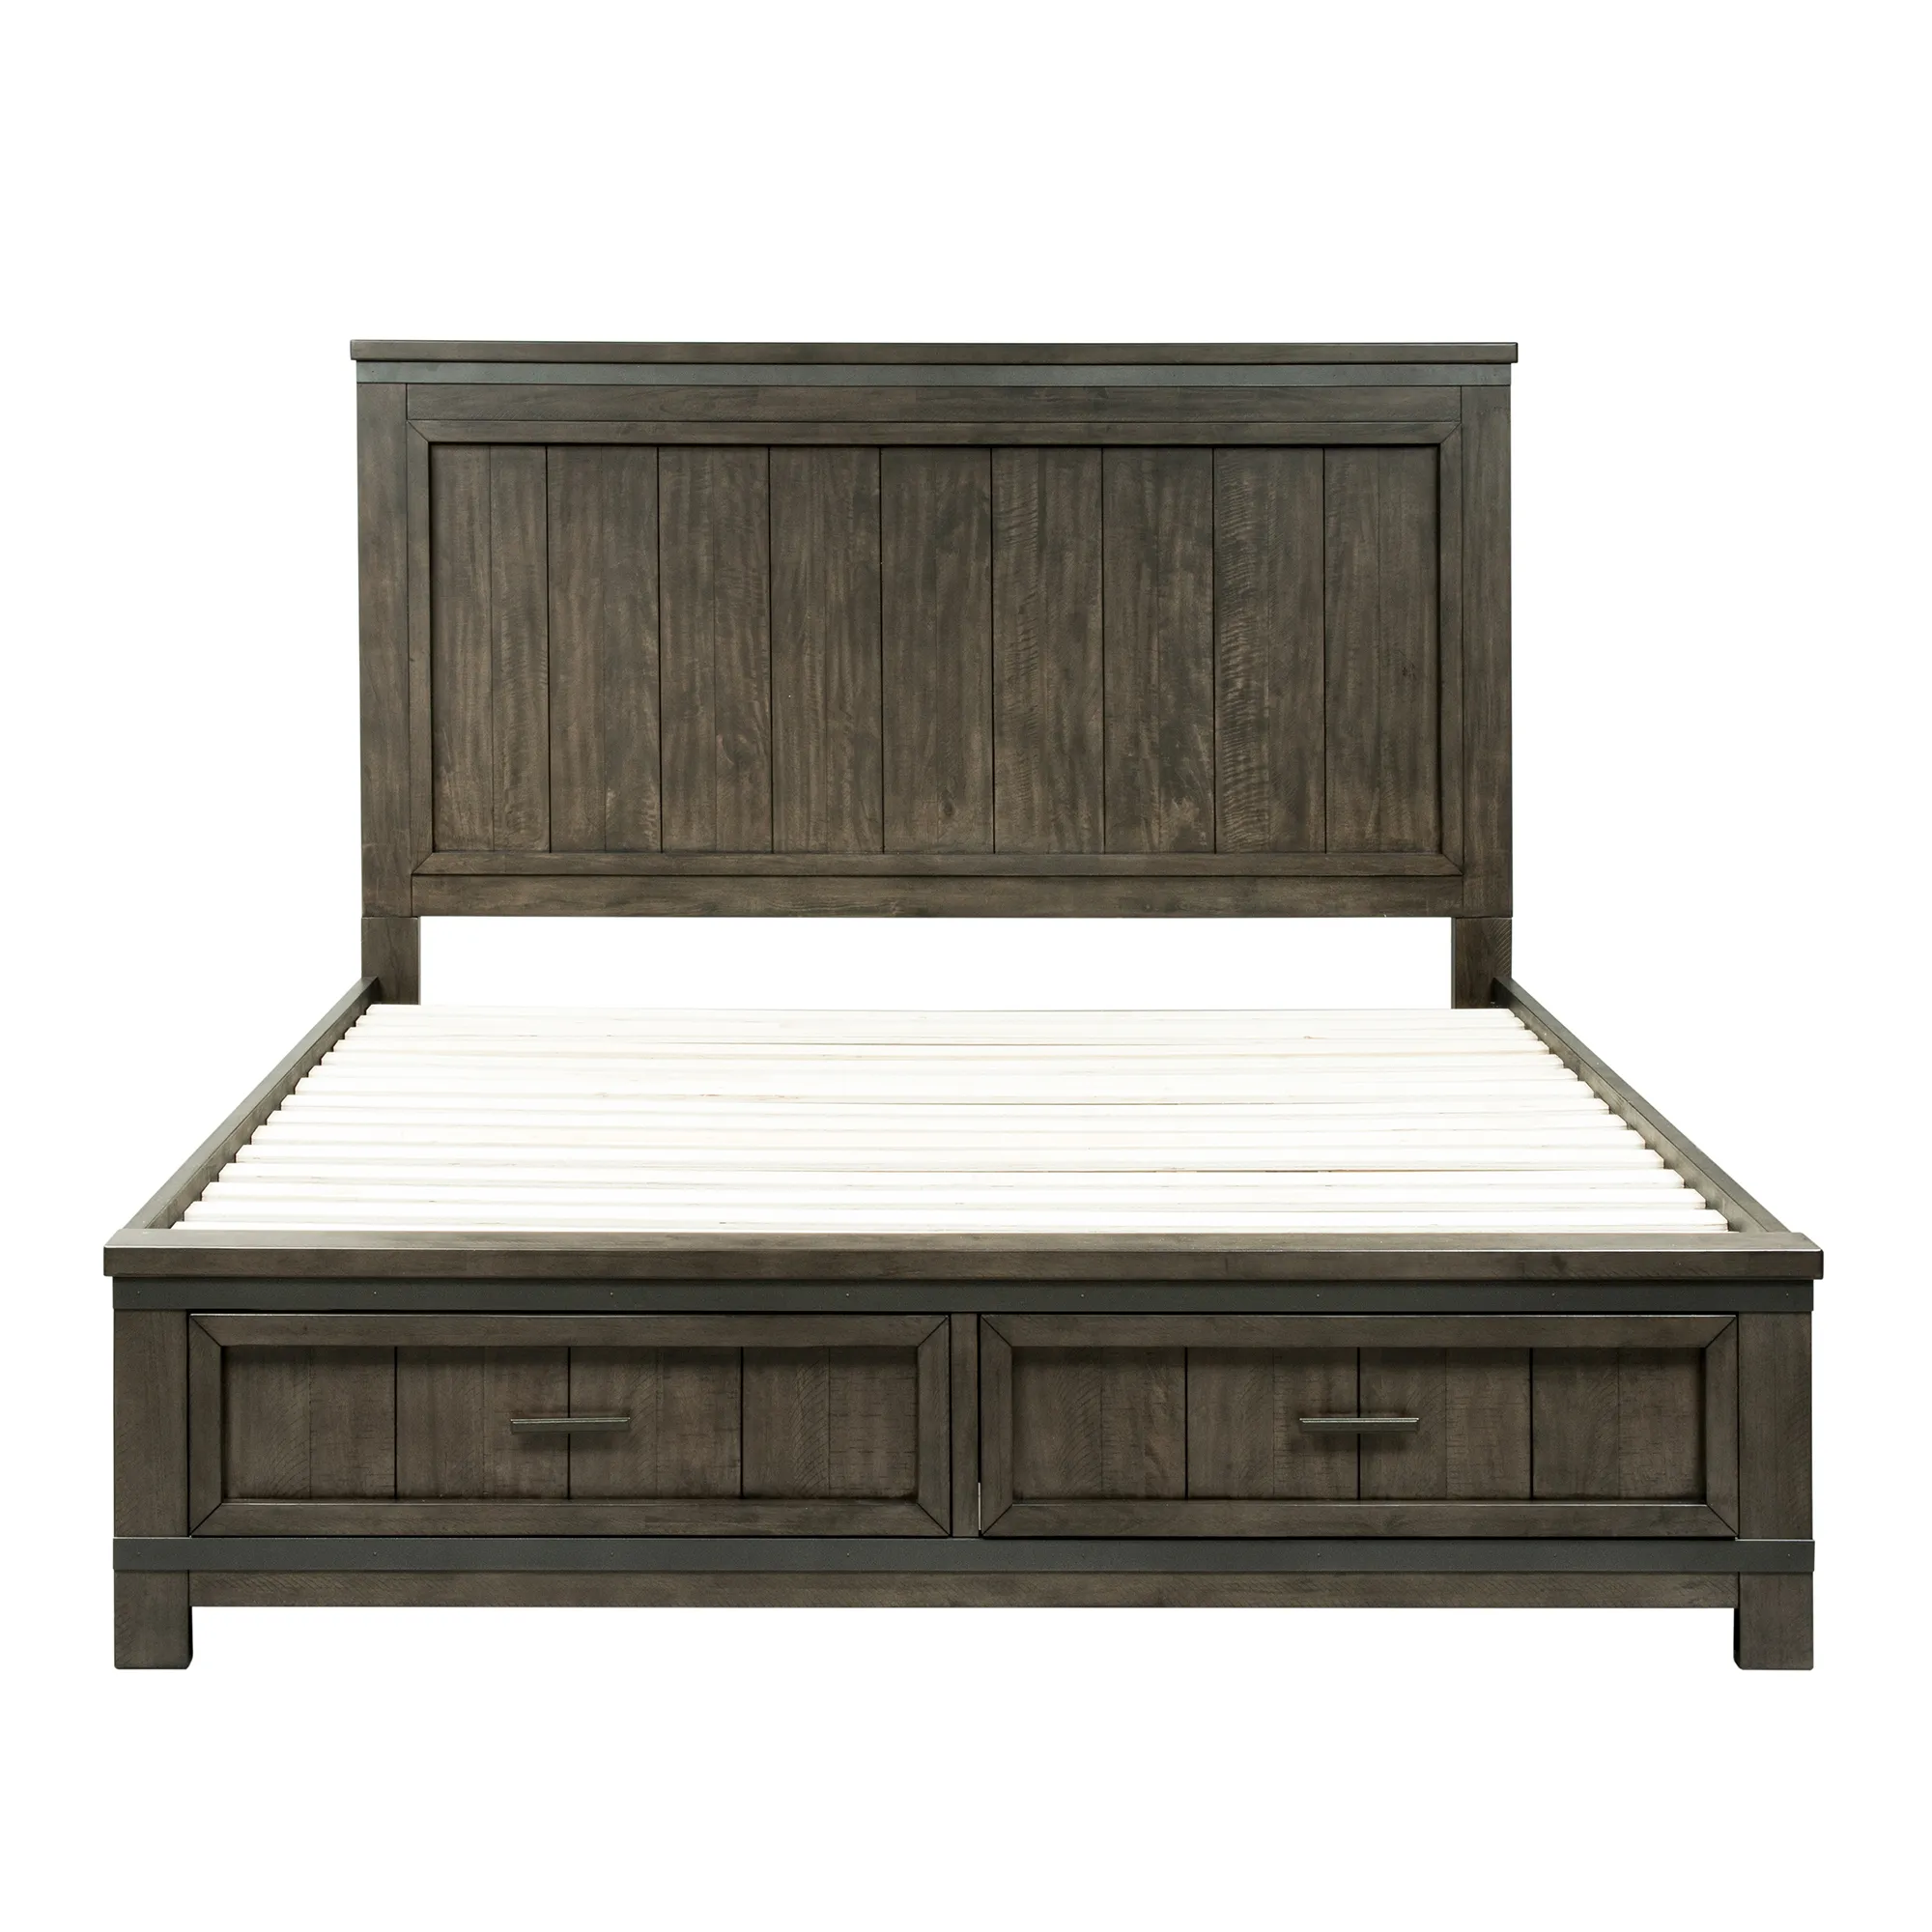 KING TWO SIDED STORAGE BED DRESSER & MIRROR CHEST - THORNWOOD HILLS